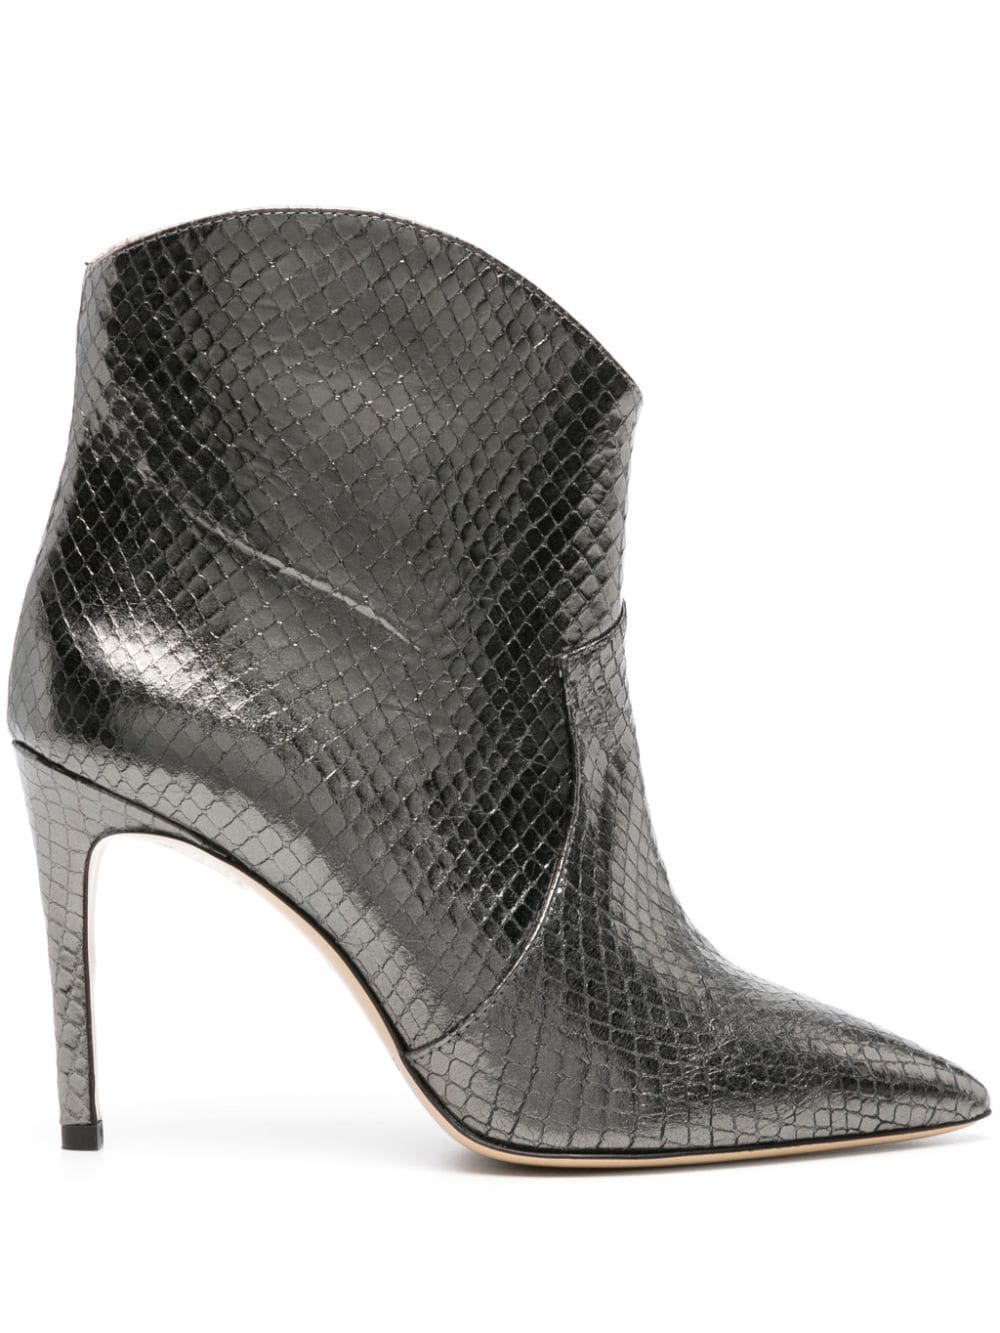 P.A.R.O.S.H. snakeskin-effect leather boots - Metallic von P.A.R.O.S.H.